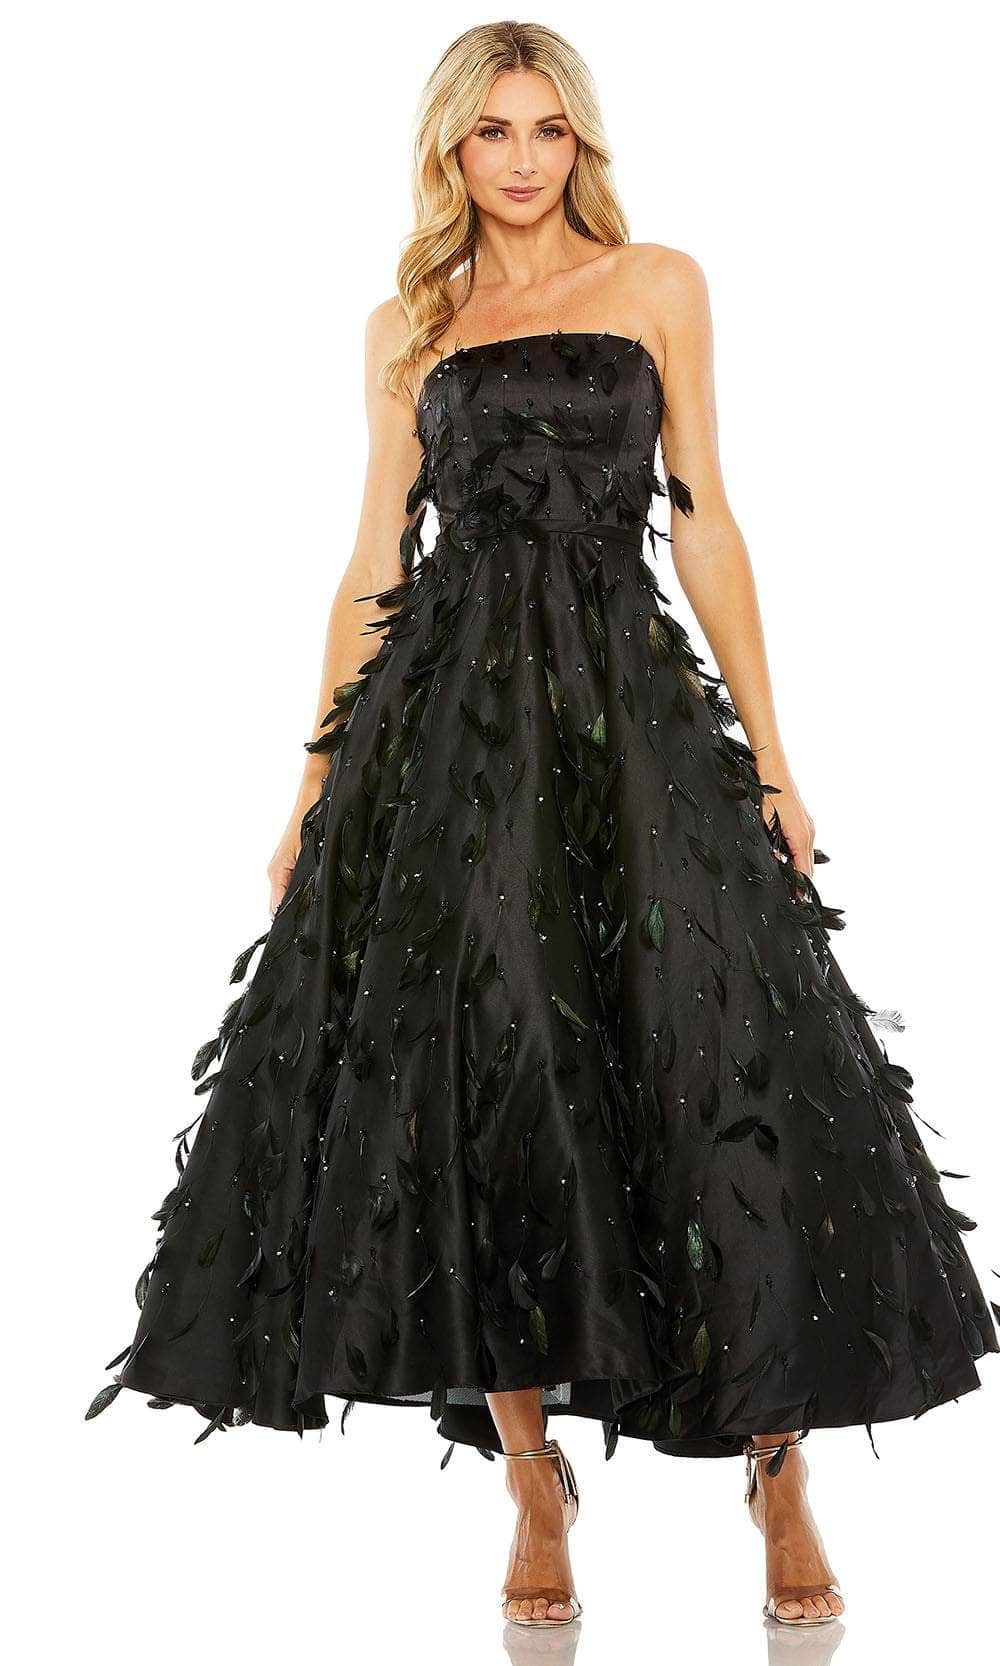 Image of Mac Duggal 11634 - Feather Embellished Strapless Ballgown